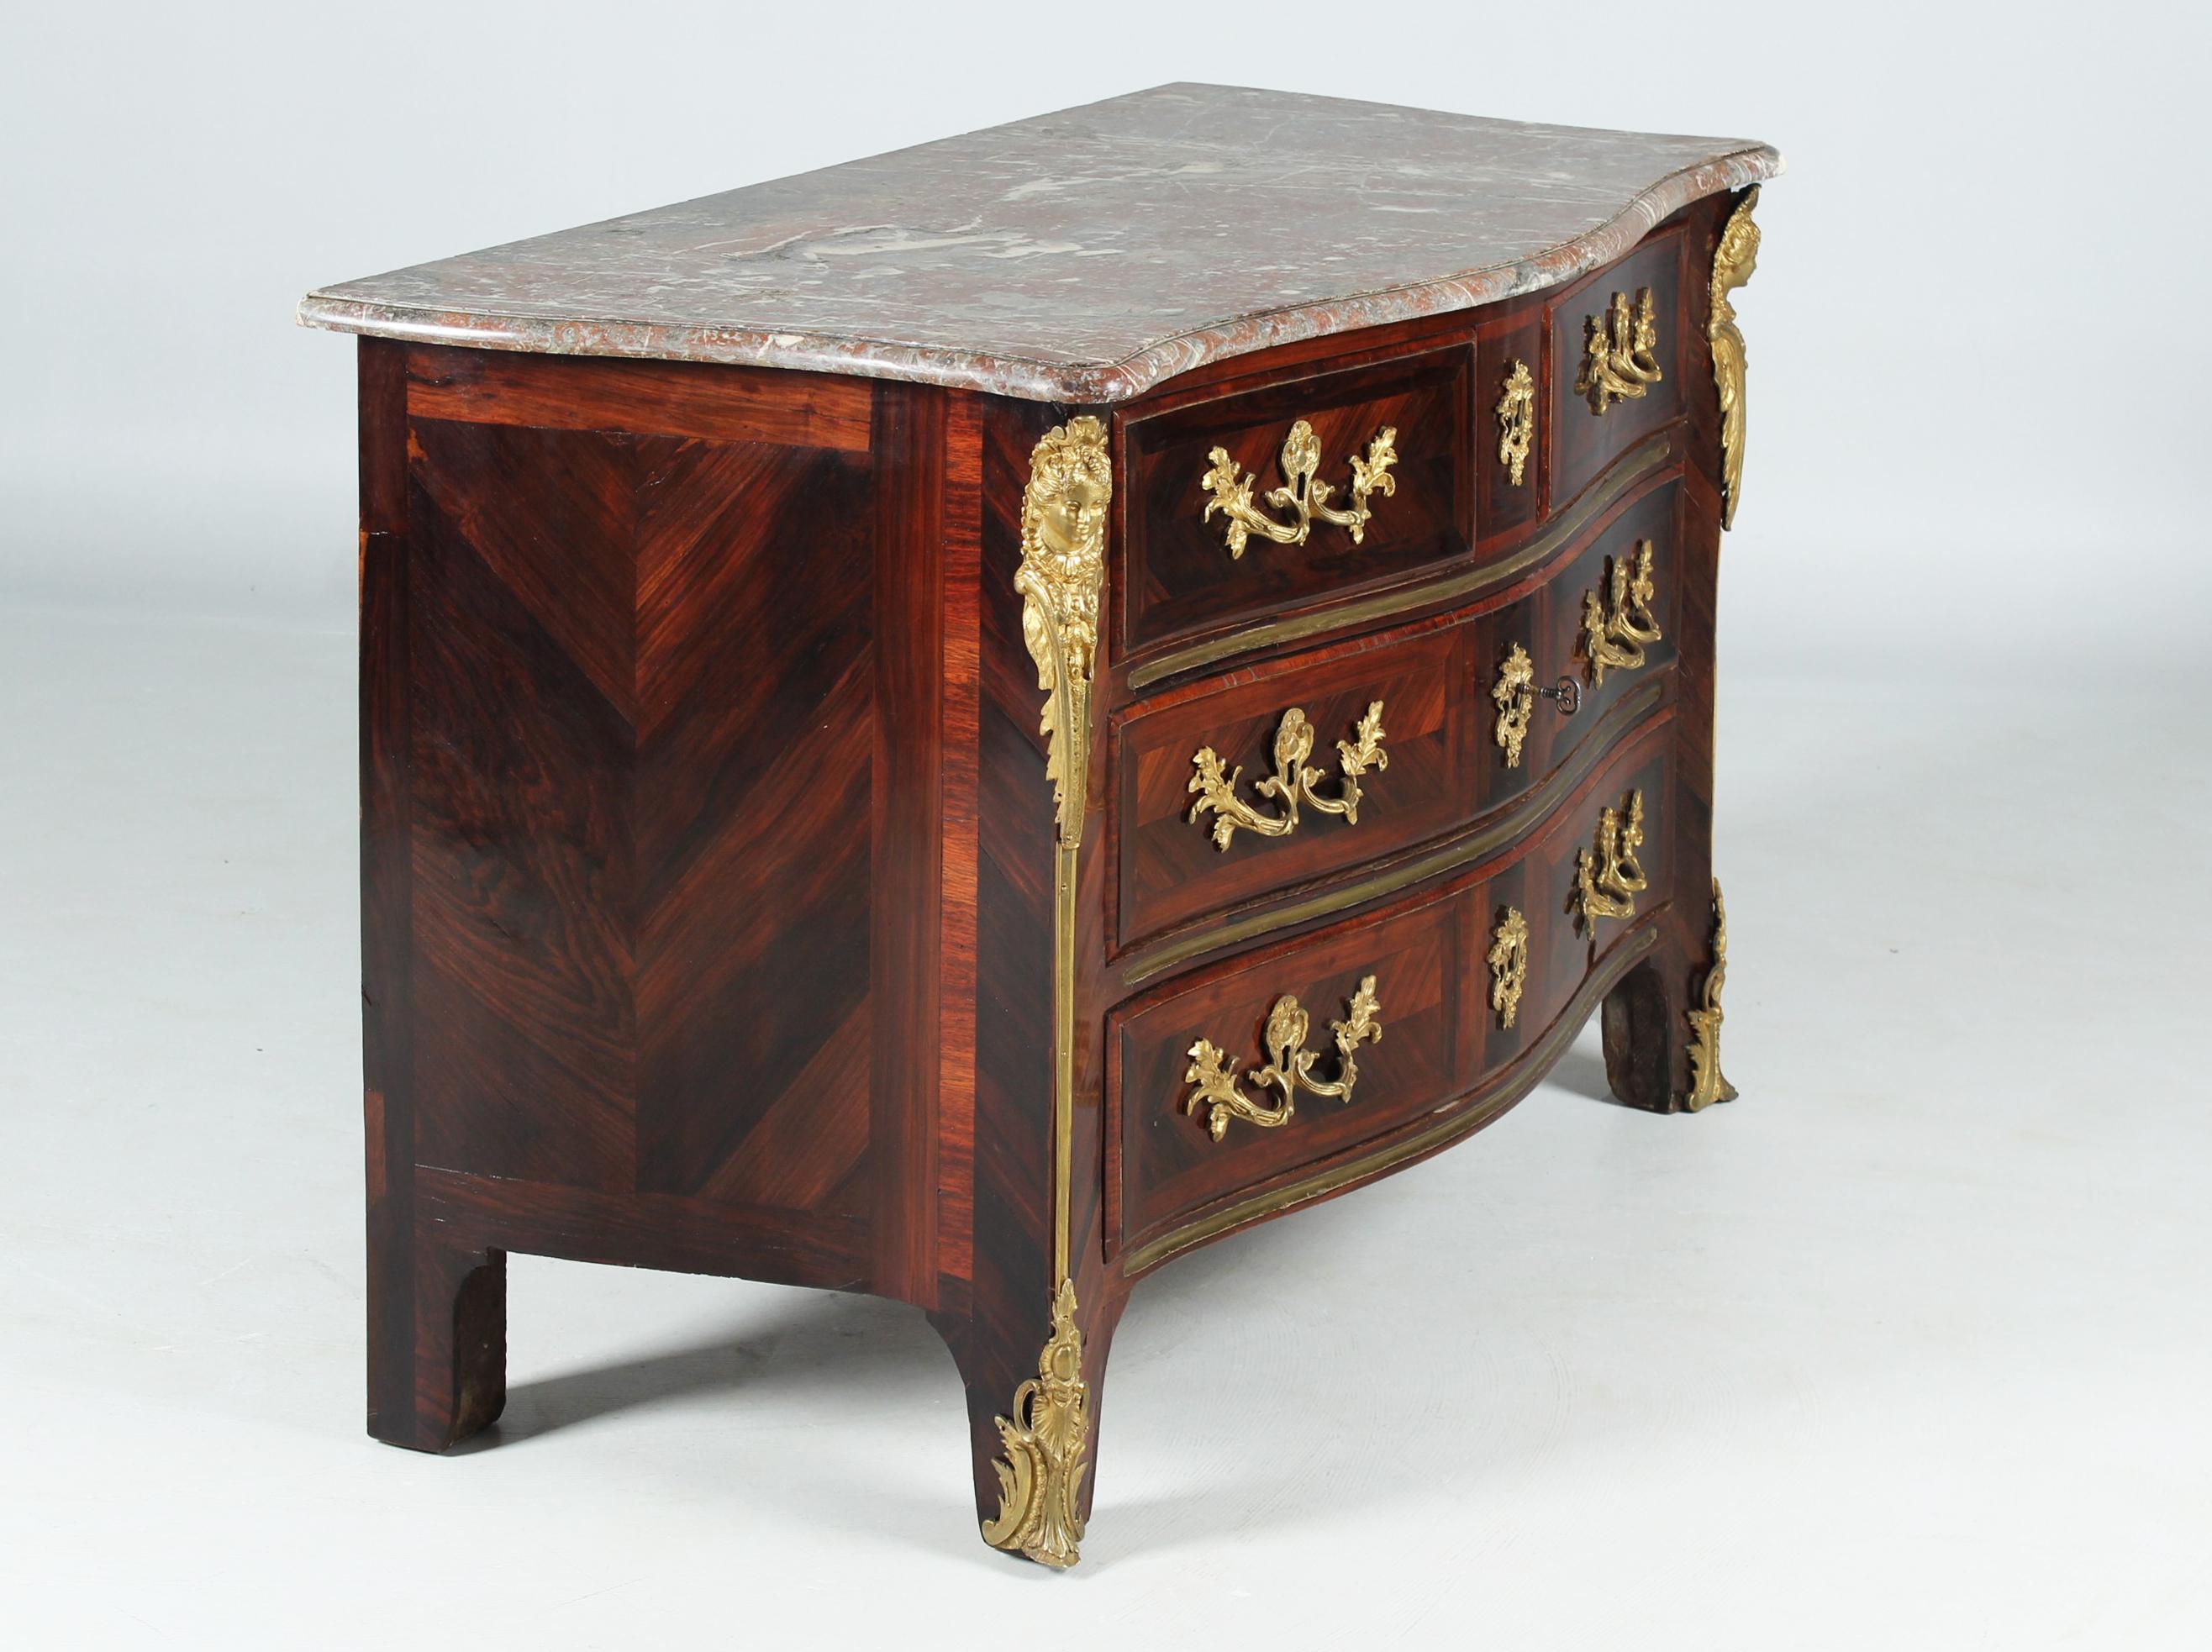 Antique French Regence chest of drawers

France
Kingwood
early 18th century

Dimensions: H x W x D: 84 x 130 x 65 cm

Description:
Representative Regence chest of drawers in dark wood with light-coloured contrasting ormolu fittings.

Three-tier